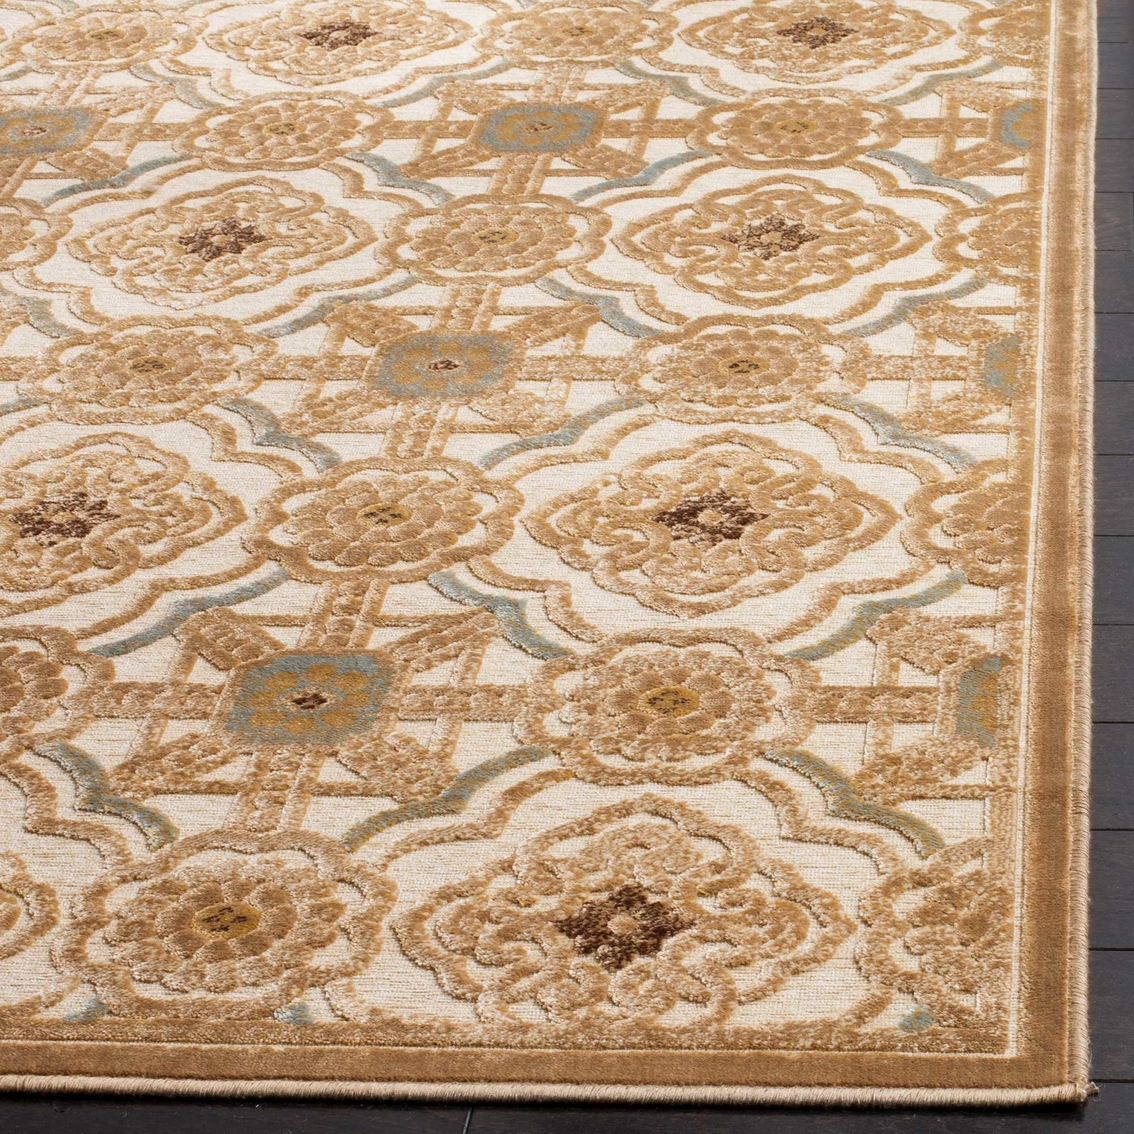 Martha Stewart Collection Imperial Palace Area Rug - Image 4 of 4